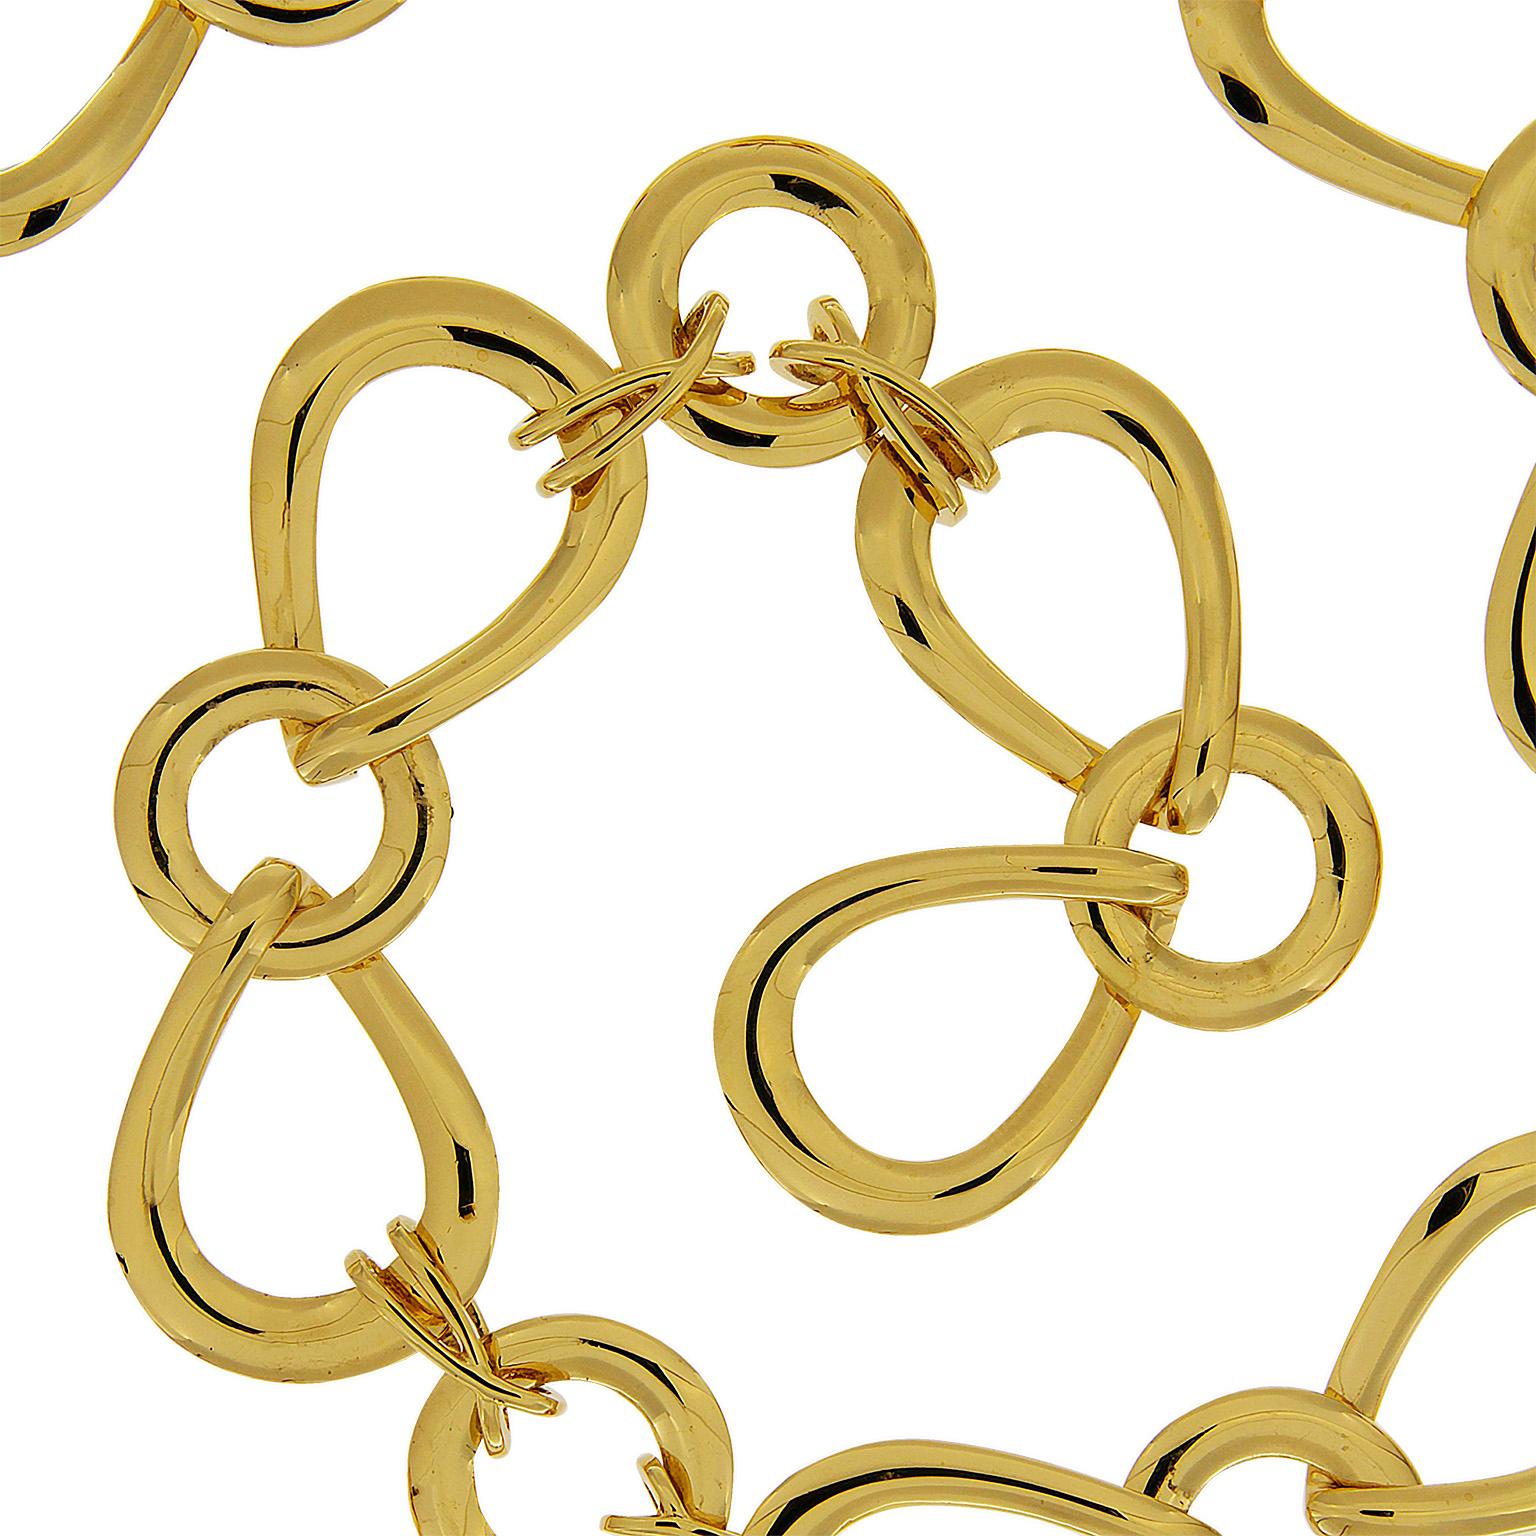 Subtle Xs appear throughout this necklace. Most of its 18k yellow gold links are circles and pear shapes. Two pear points fasten to a circle, creating a bow-tie outline. Still more rounds fill the spaces between bows, with thin Xs serving as links.